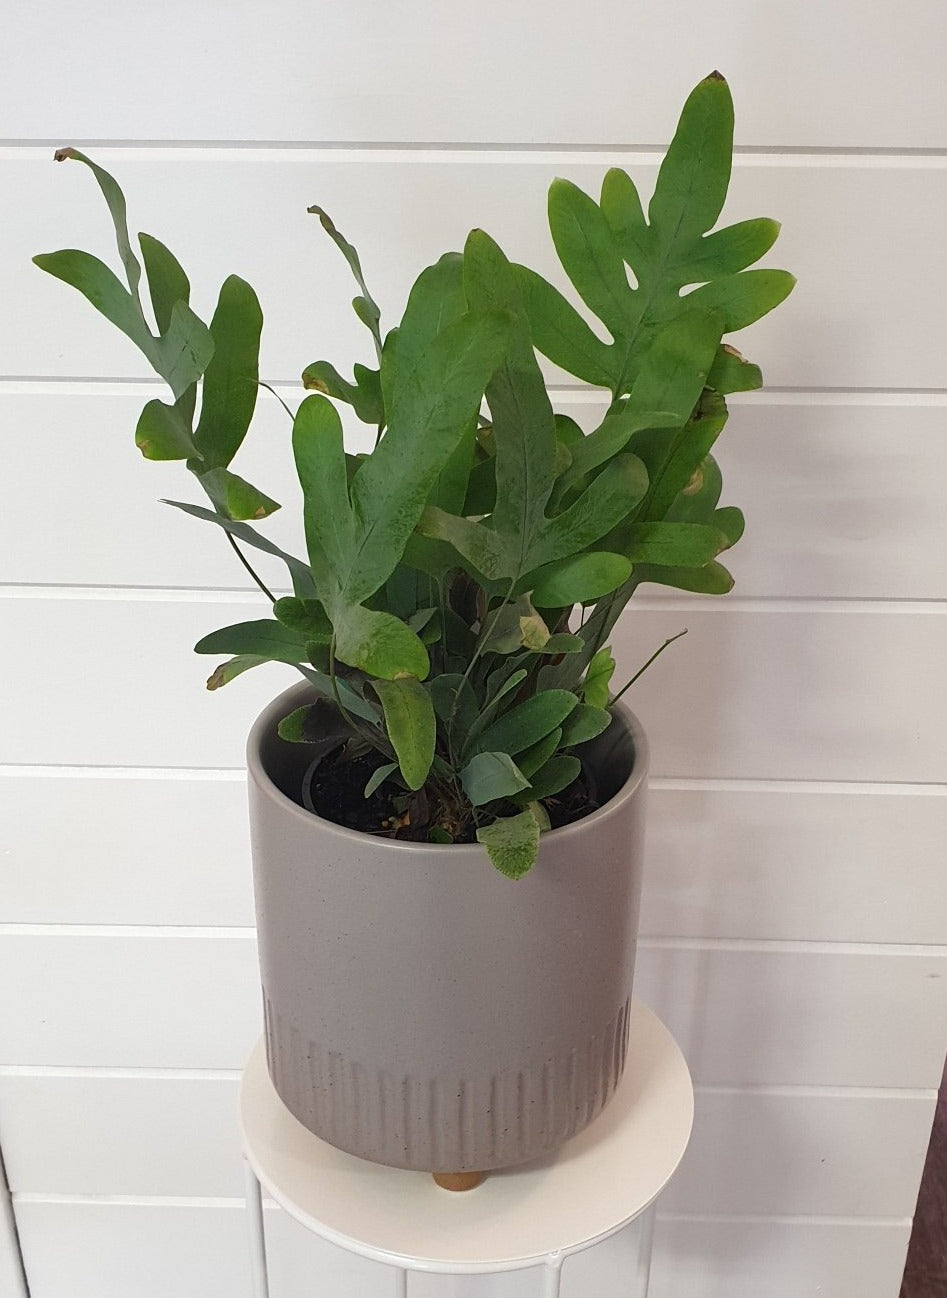 Pictured is a Blue Star fern. Lush, foliage plant, with upright leaves. Available for delivery to Yamba, Maclean, Grafton & Iluka from Willow Botanica Florist.